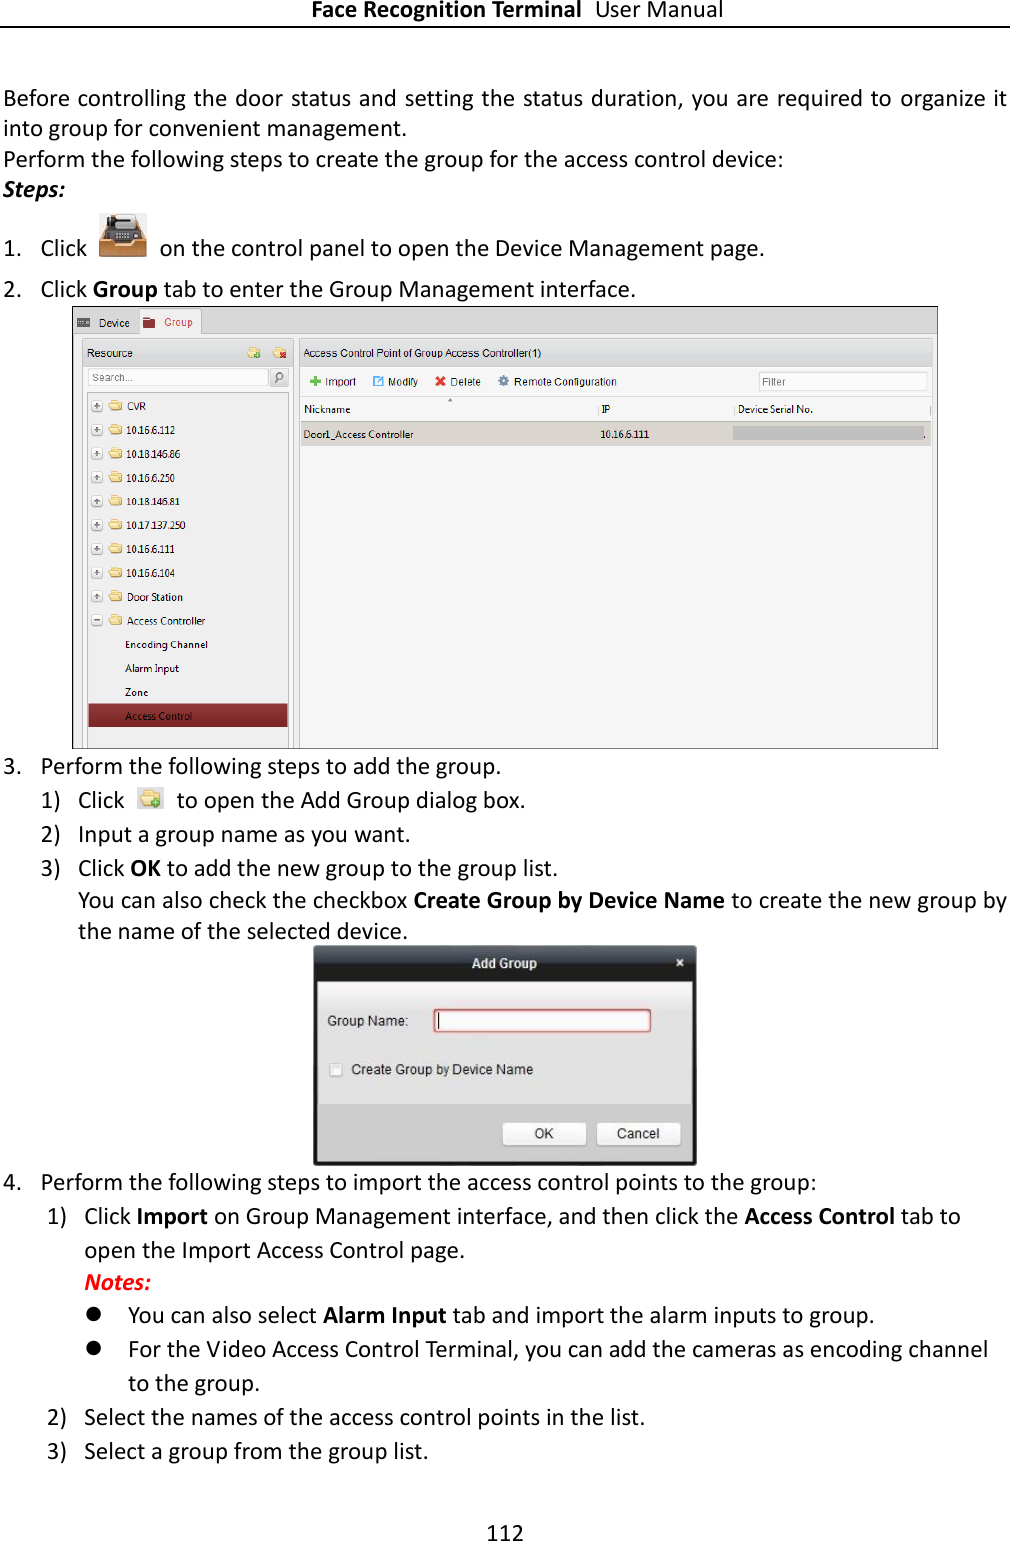 Face Recognition Terminal User Manual 112  Before controlling the door status and setting the status duration, you are required to organize it into group for convenient management.   Perform the following steps to create the group for the access control device: Steps: 1. Click    on the control panel to open the Device Management page. 2. Click Group tab to enter the Group Management interface.  3. Perform the following steps to add the group. 1) Click    to open the Add Group dialog box. 2) Input a group name as you want. 3) Click OK to add the new group to the group list. You can also check the checkbox Create Group by Device Name to create the new group by the name of the selected device.  4. Perform the following steps to import the access control points to the group: 1) Click Import on Group Management interface, and then click the Access Control tab to open the Import Access Control page. Notes:    You can also select Alarm Input tab and import the alarm inputs to group.  For the Video Access Control Terminal, you can add the cameras as encoding channel to the group. 2) Select the names of the access control points in the list. 3) Select a group from the group list. 